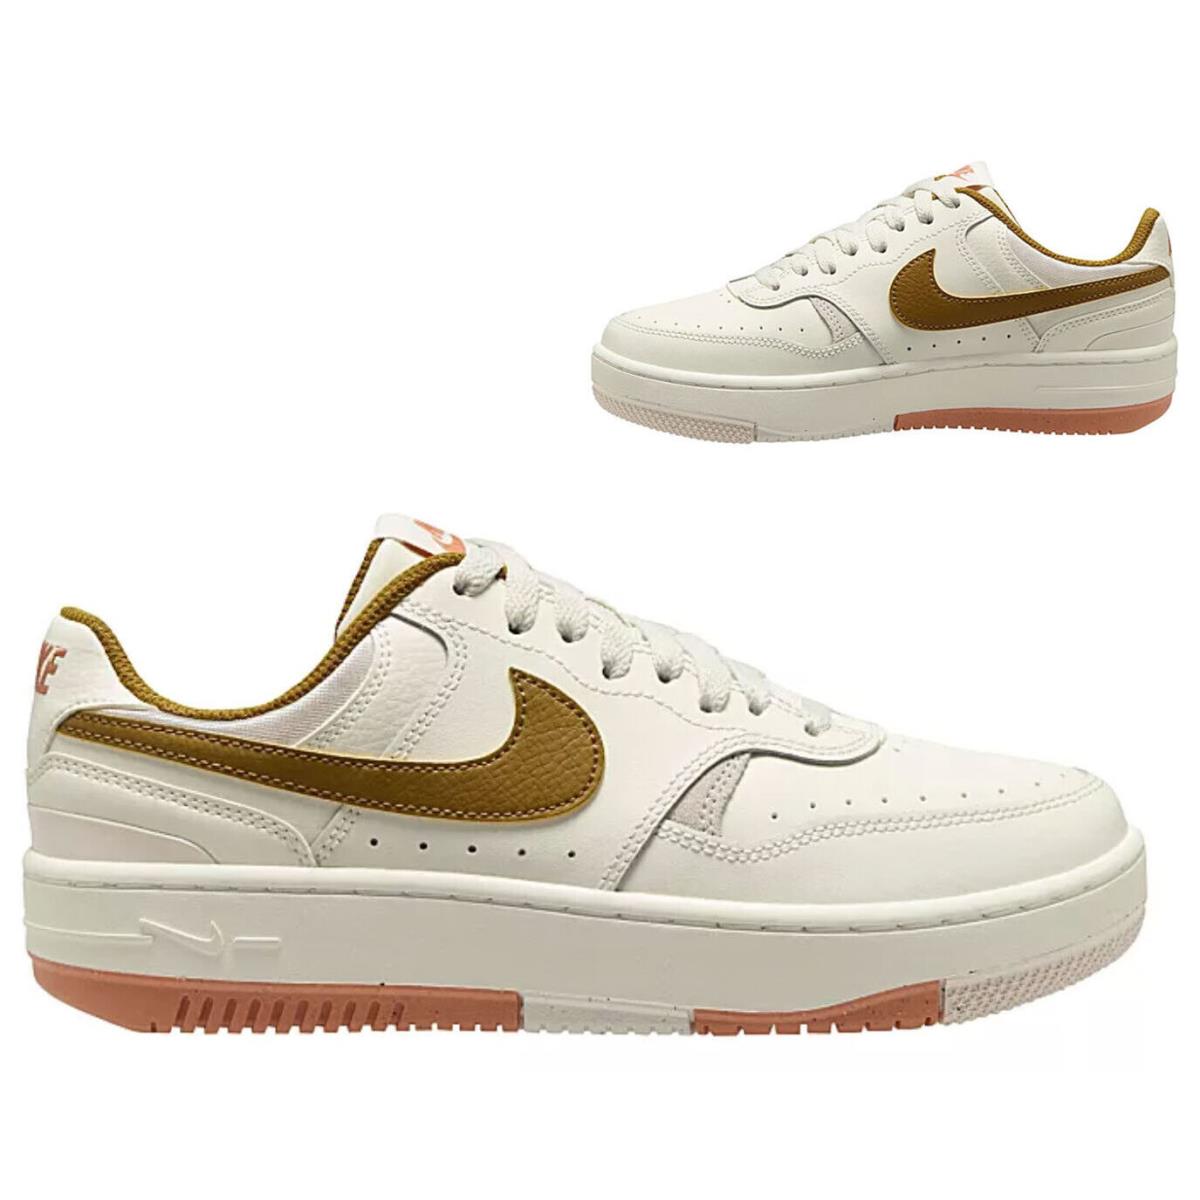 Nike Gamma Force Athletic Sneakers Shoes Leather Women`s of White All Sizes